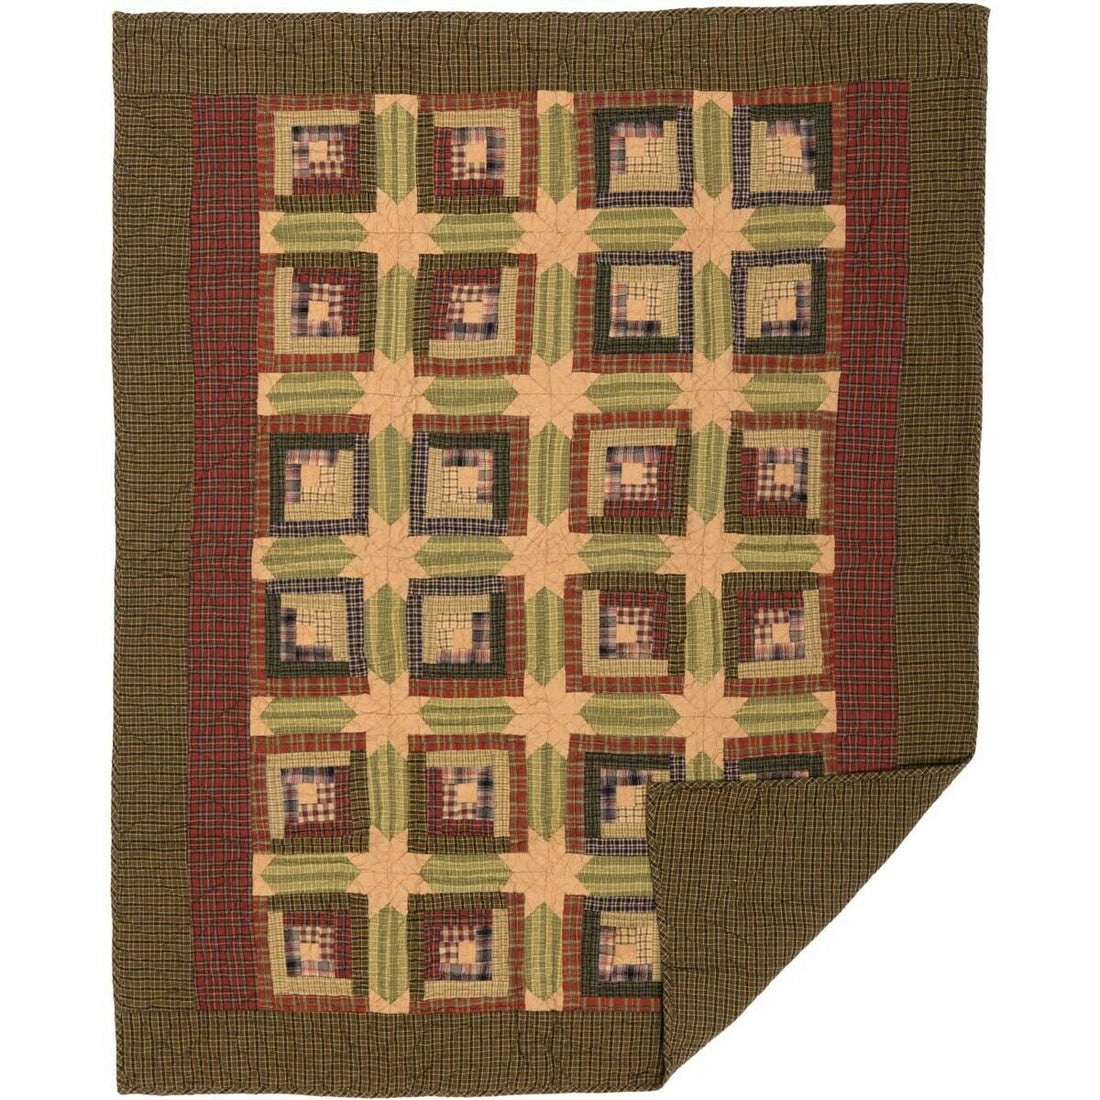 Primitive Tea Cabin Throw 60X50 Log Cabin Patchwork Hand Quilting - The Primitive Pineapple Collection